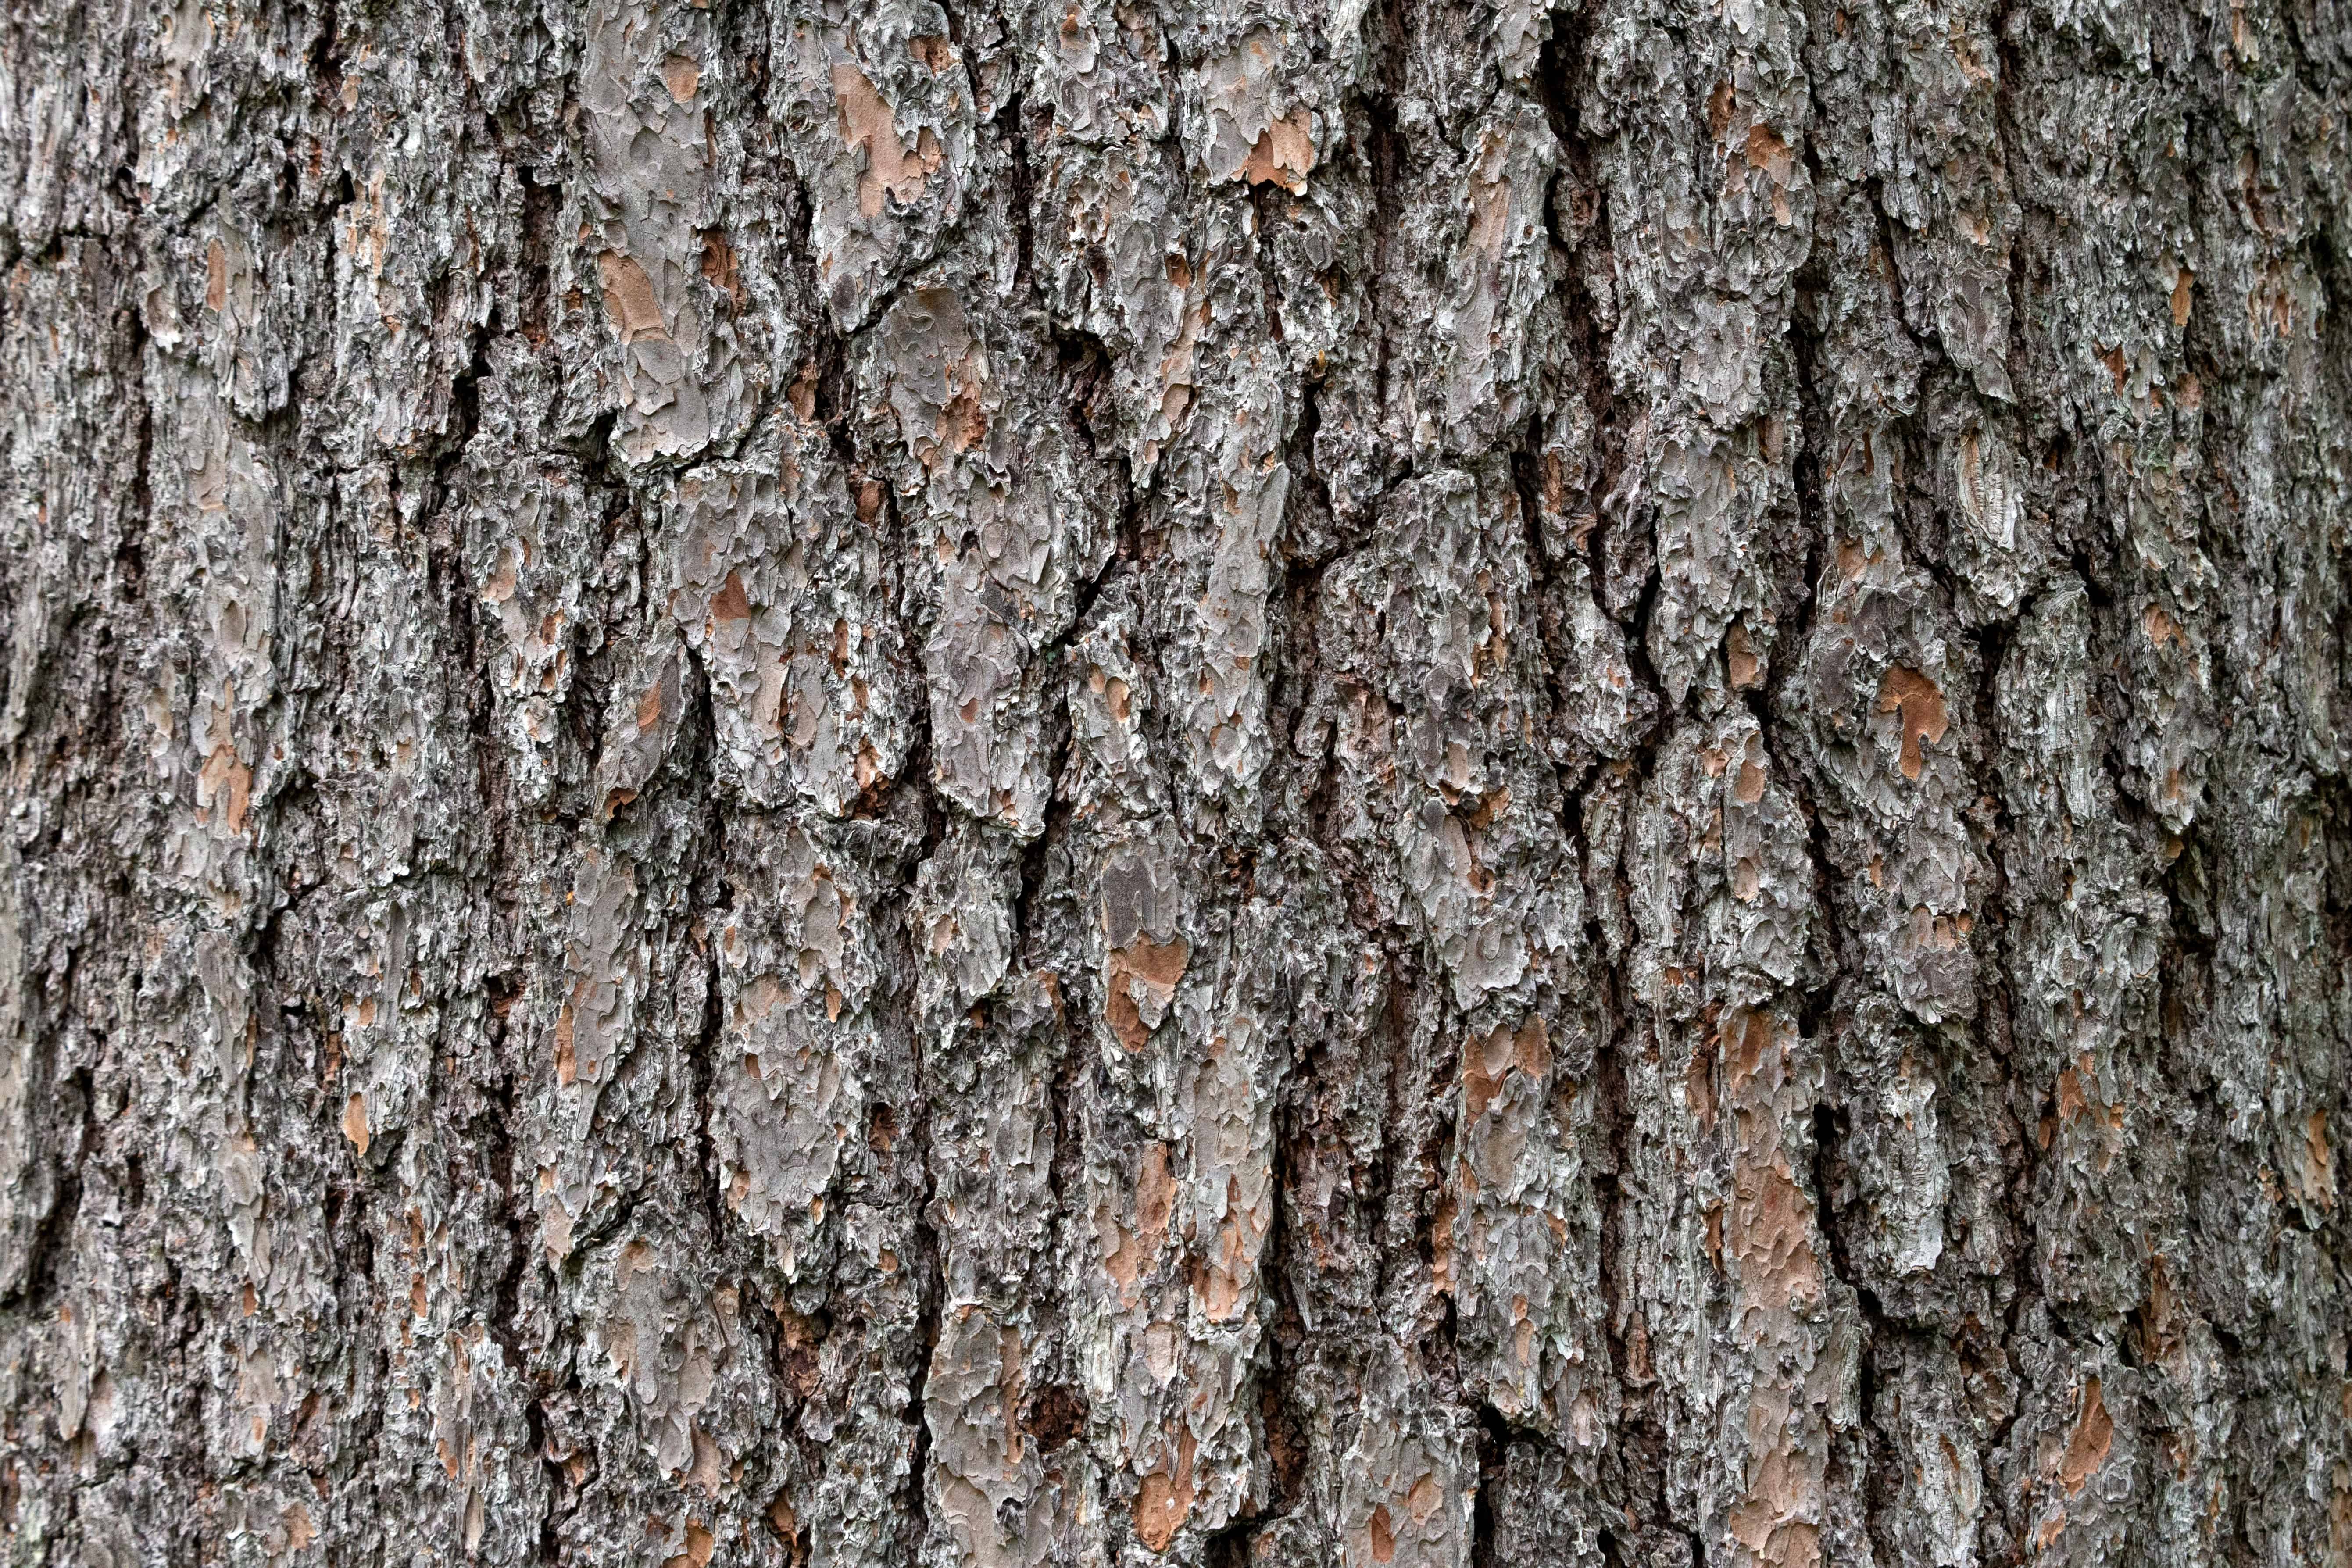 Tree Bark Offers Color, Texture and Pattern